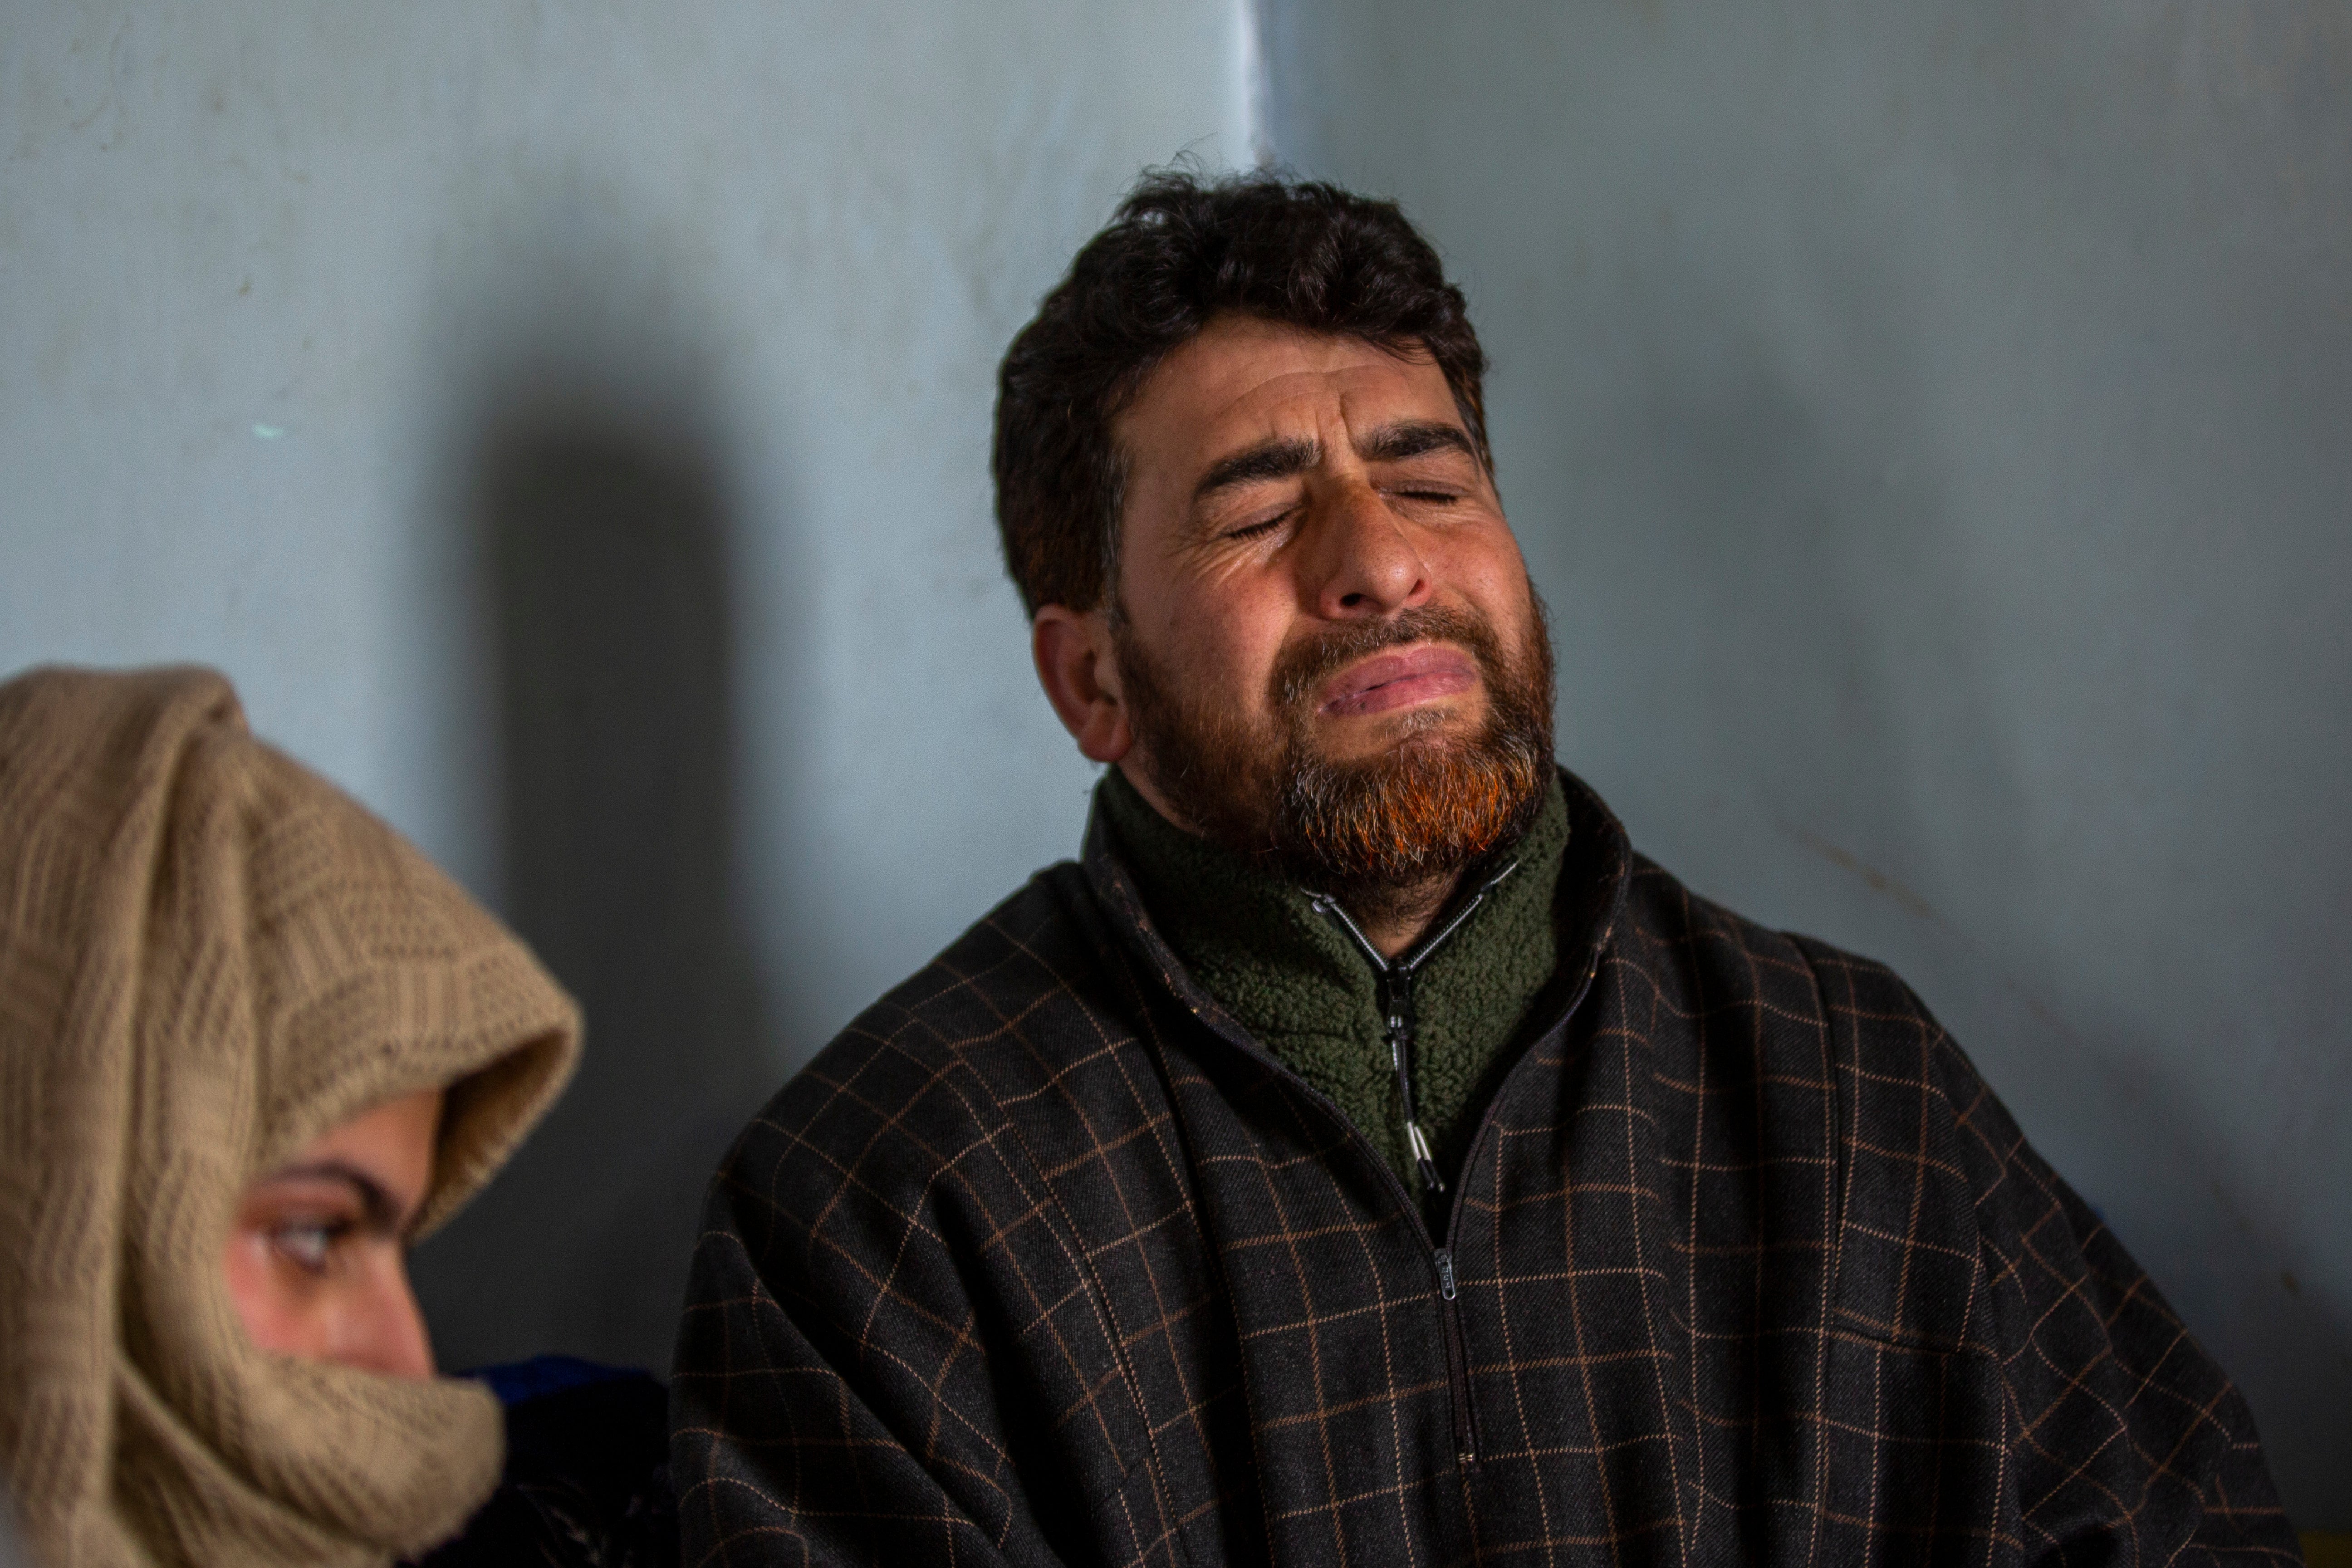 FILE-In this Jan. 5, 2021 file photo, Mushtaq Ahmad Wani, father of 16-year-old Athar Mushtaq, who was fatally shot by Government forces grieves while talking to Associated Press in Bellow, south of Srinagar, Indian controlled Kashmir. Police have booked the Kashmiri man seeking the body of his slain teenage son under India’s harsh anti-terror law, accusing him of organizing illegal processions under criminal conspiracy. (AP Photo/ Dar Yasin, File)